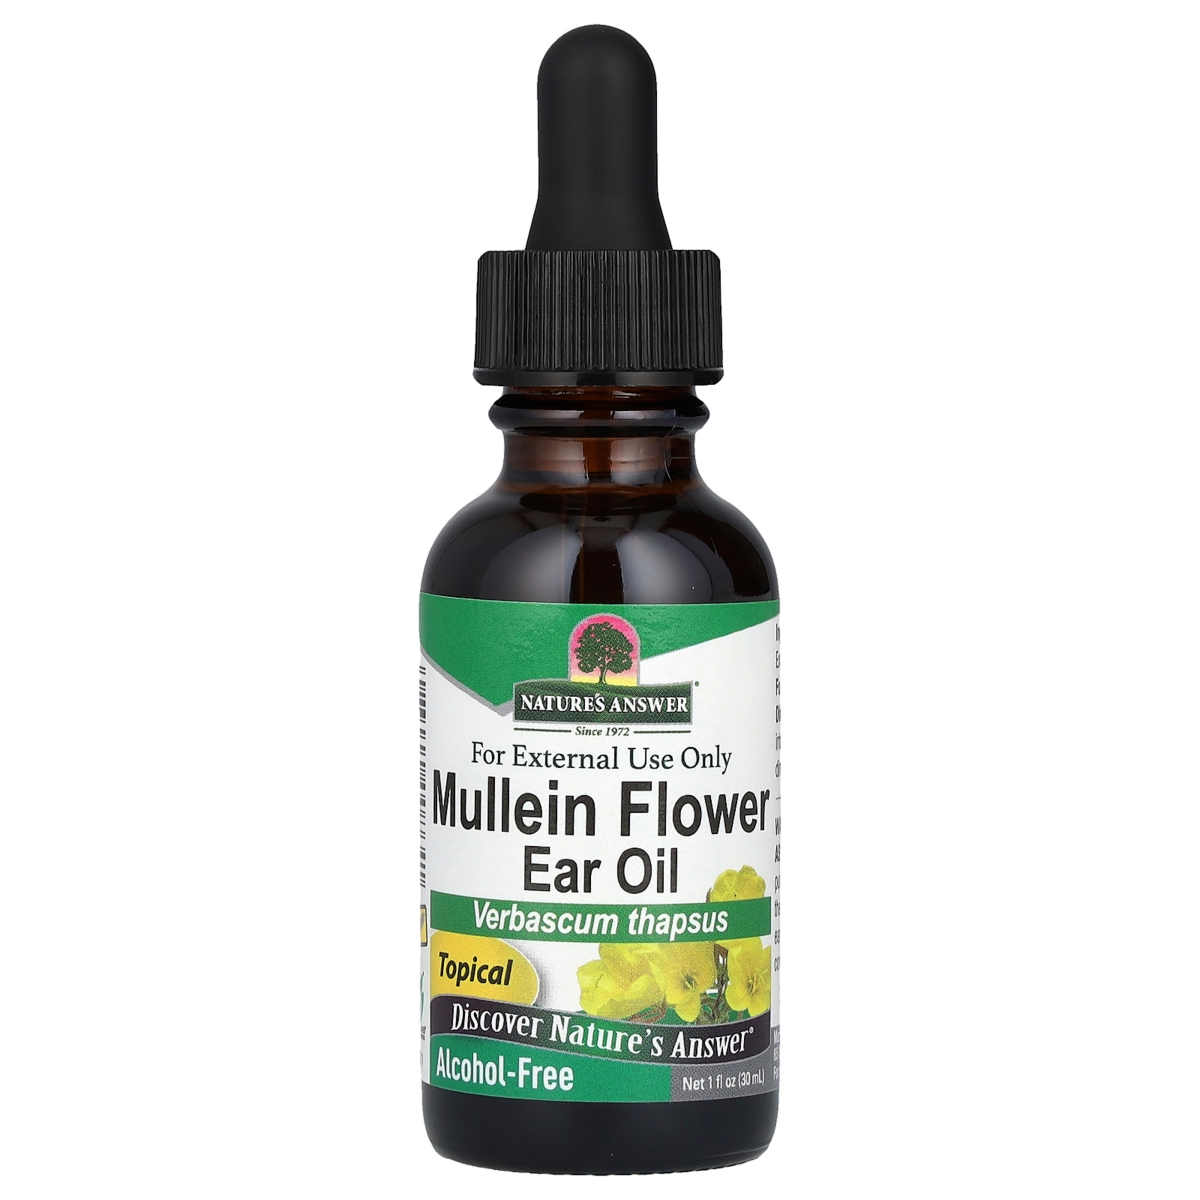 Mullein Flower Ear Oil Alcohol-Free - 1 fl oz (30 ml) - Assorted Pre-pack (See Table